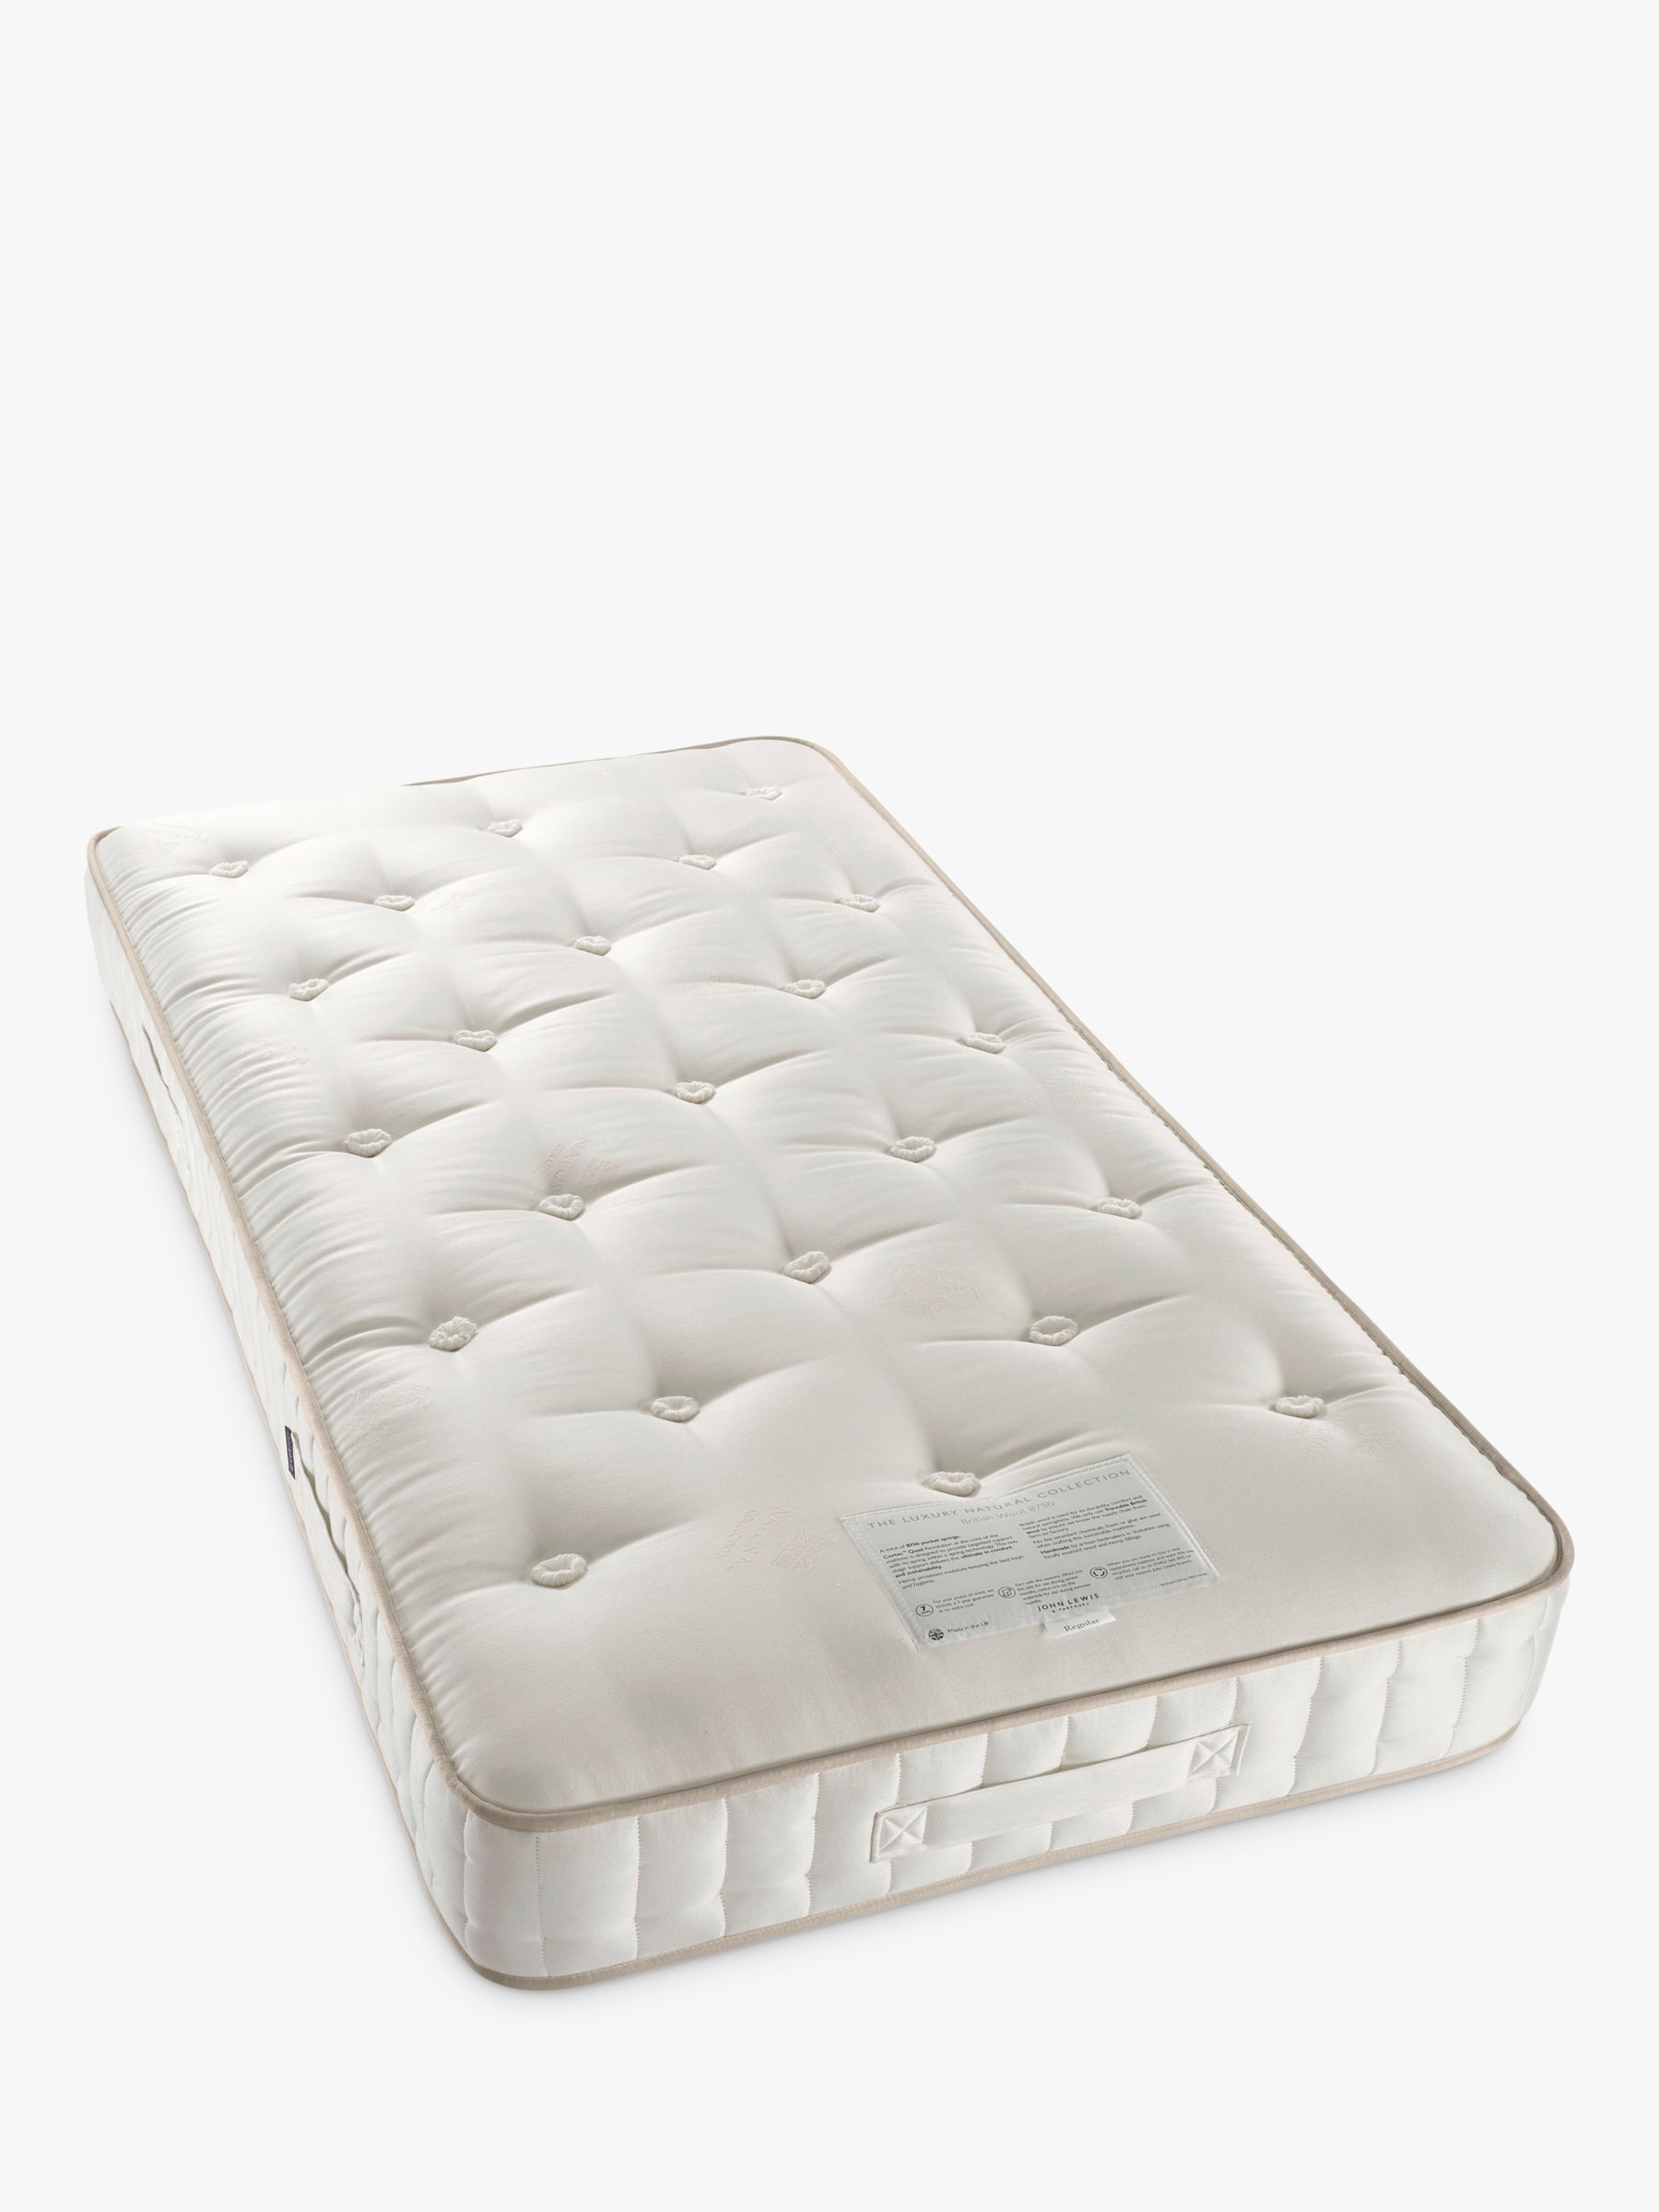 Photo of John lewis luxury natural collection egyptian cotton 5750 single firmer tension pocket spring mattress